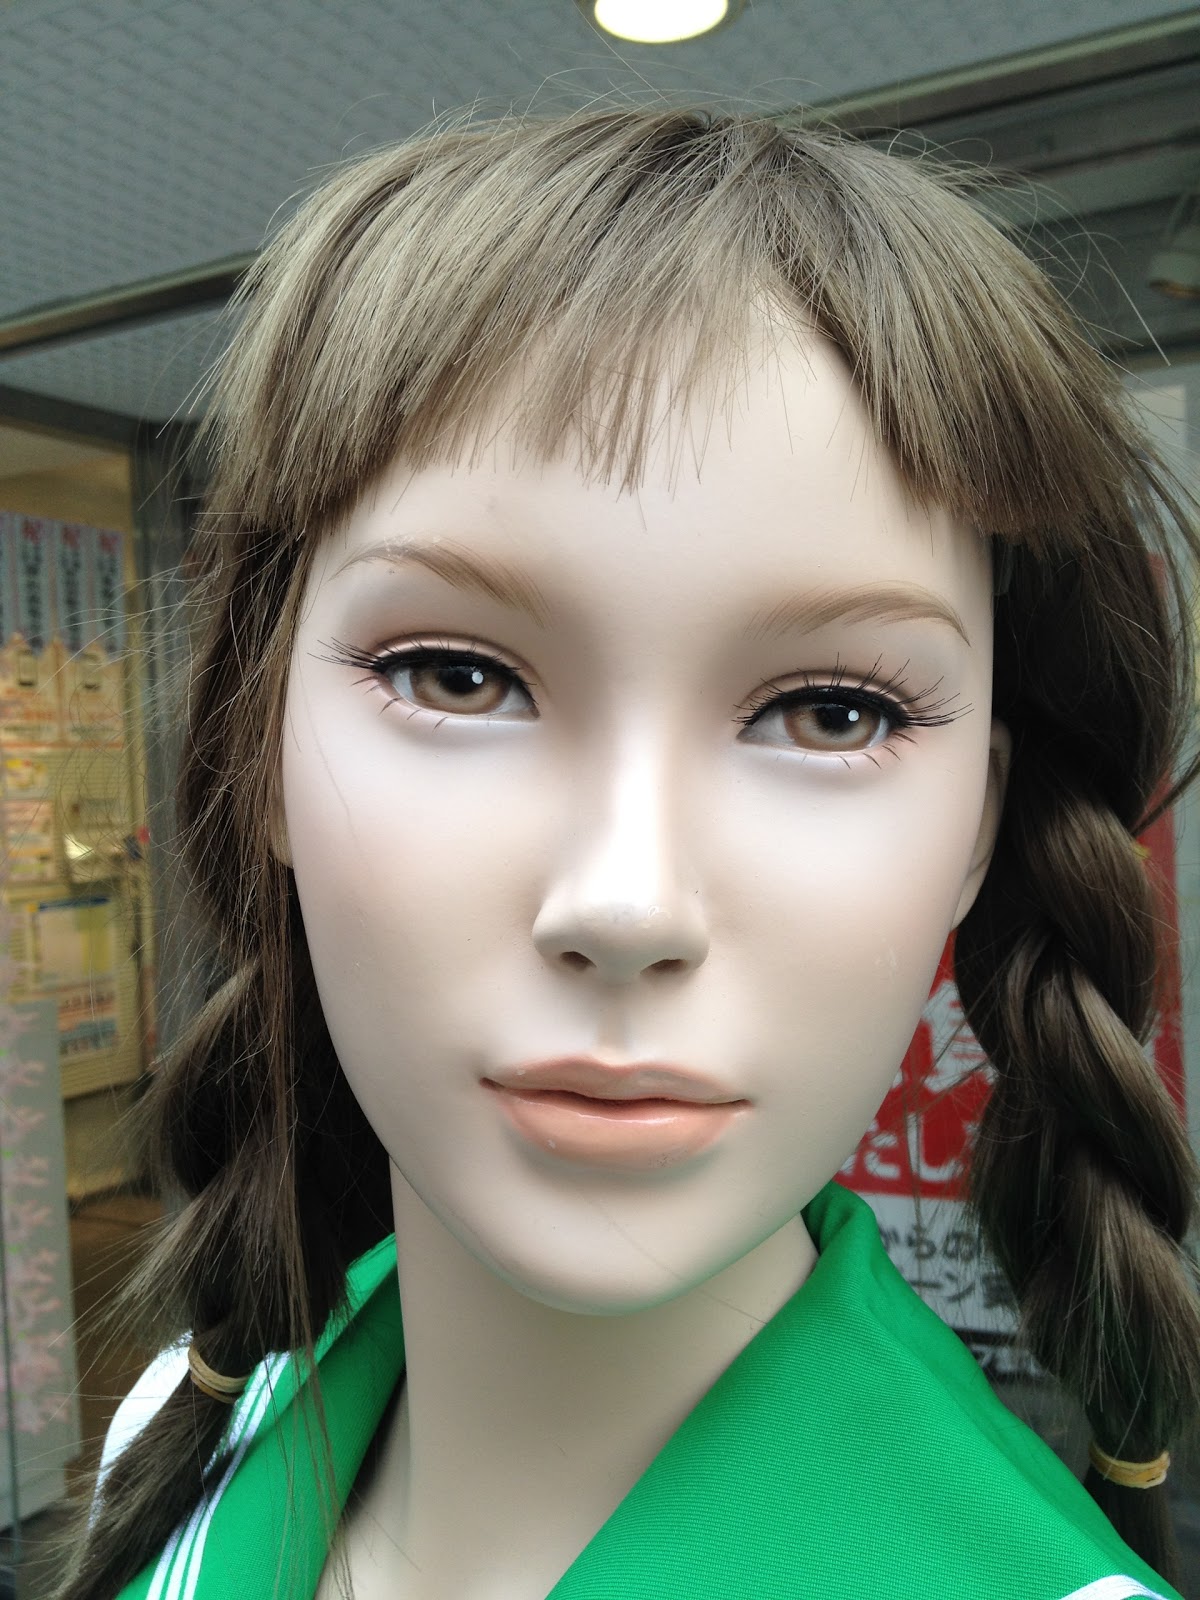 Sexy Japanese High School Girl Mannequin - The Best Mannequin in the World?...